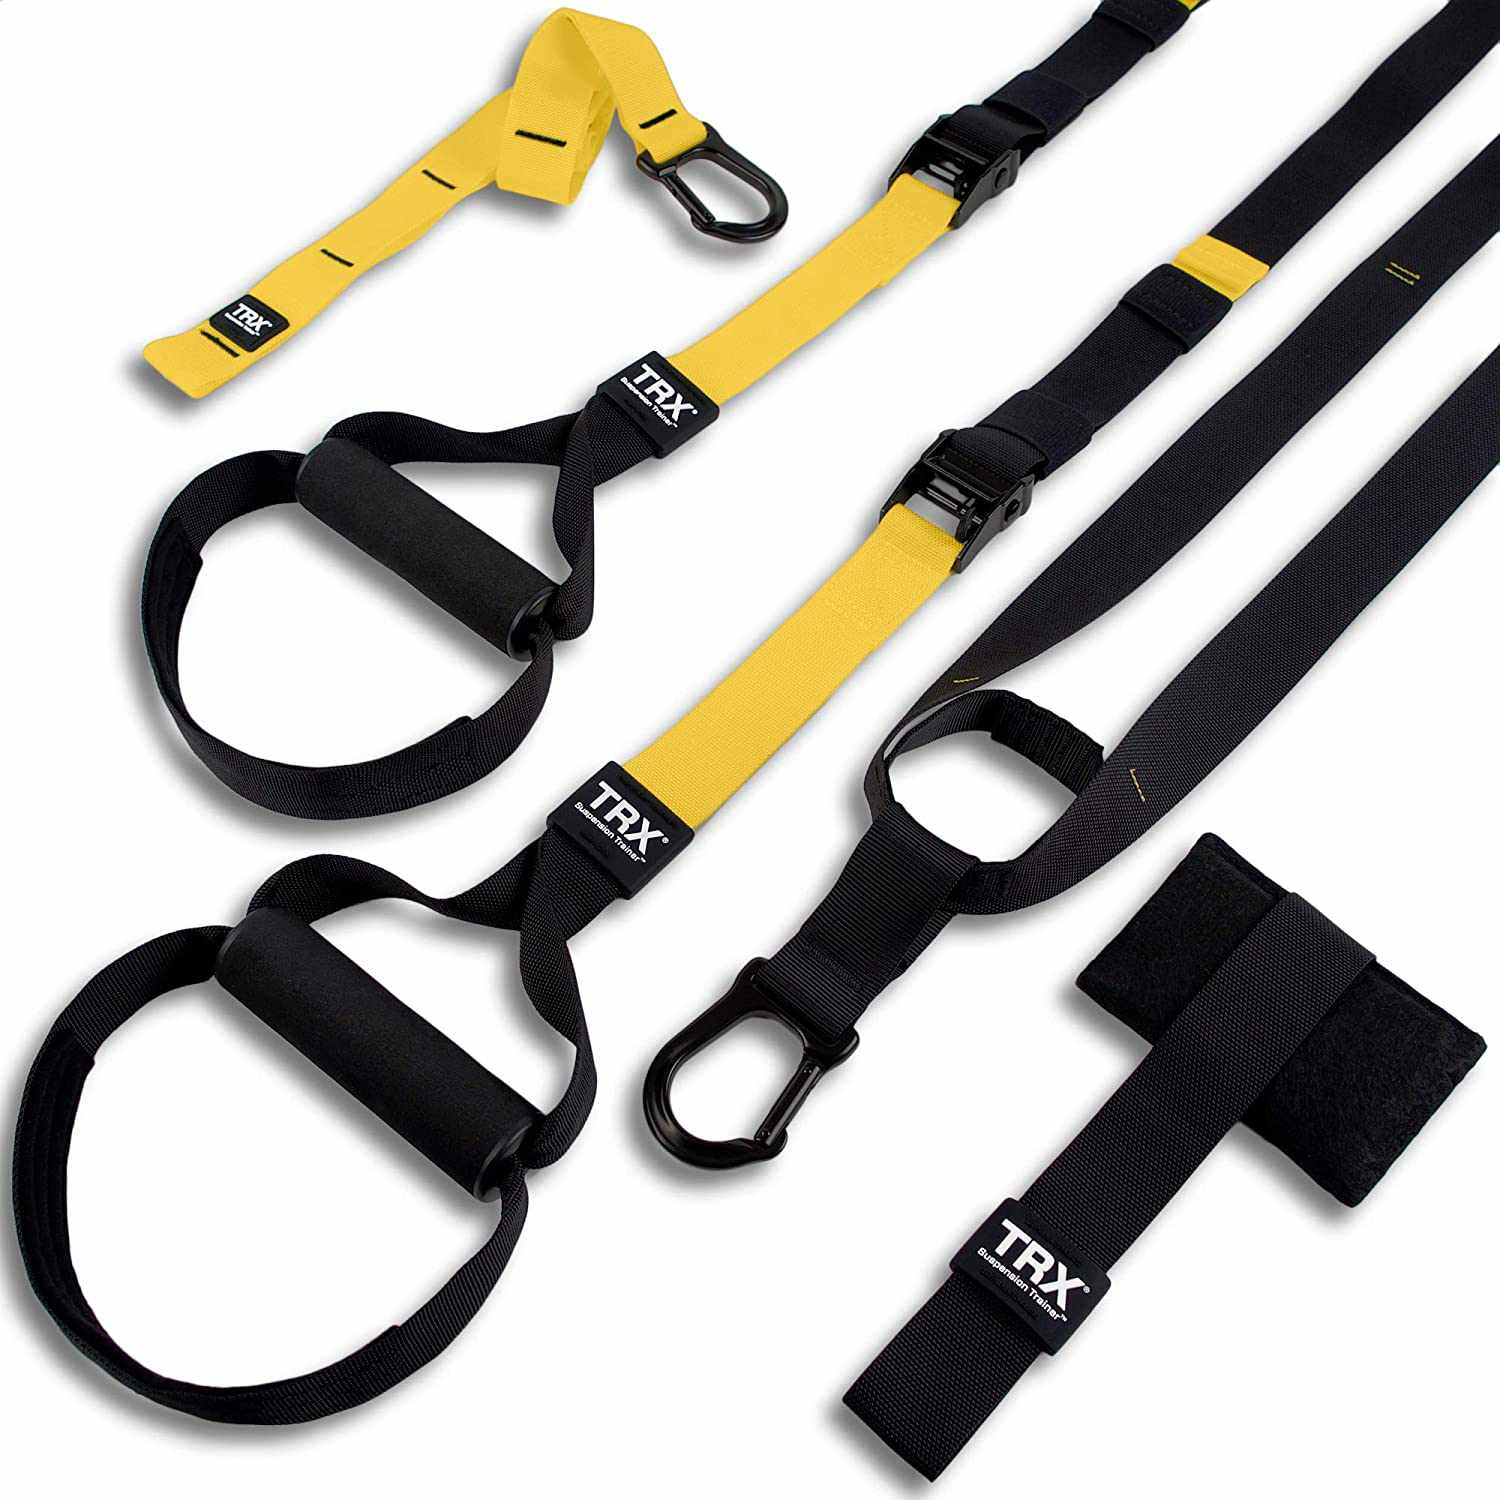 TRX All-in-One Suspension Training Fitness Systeem